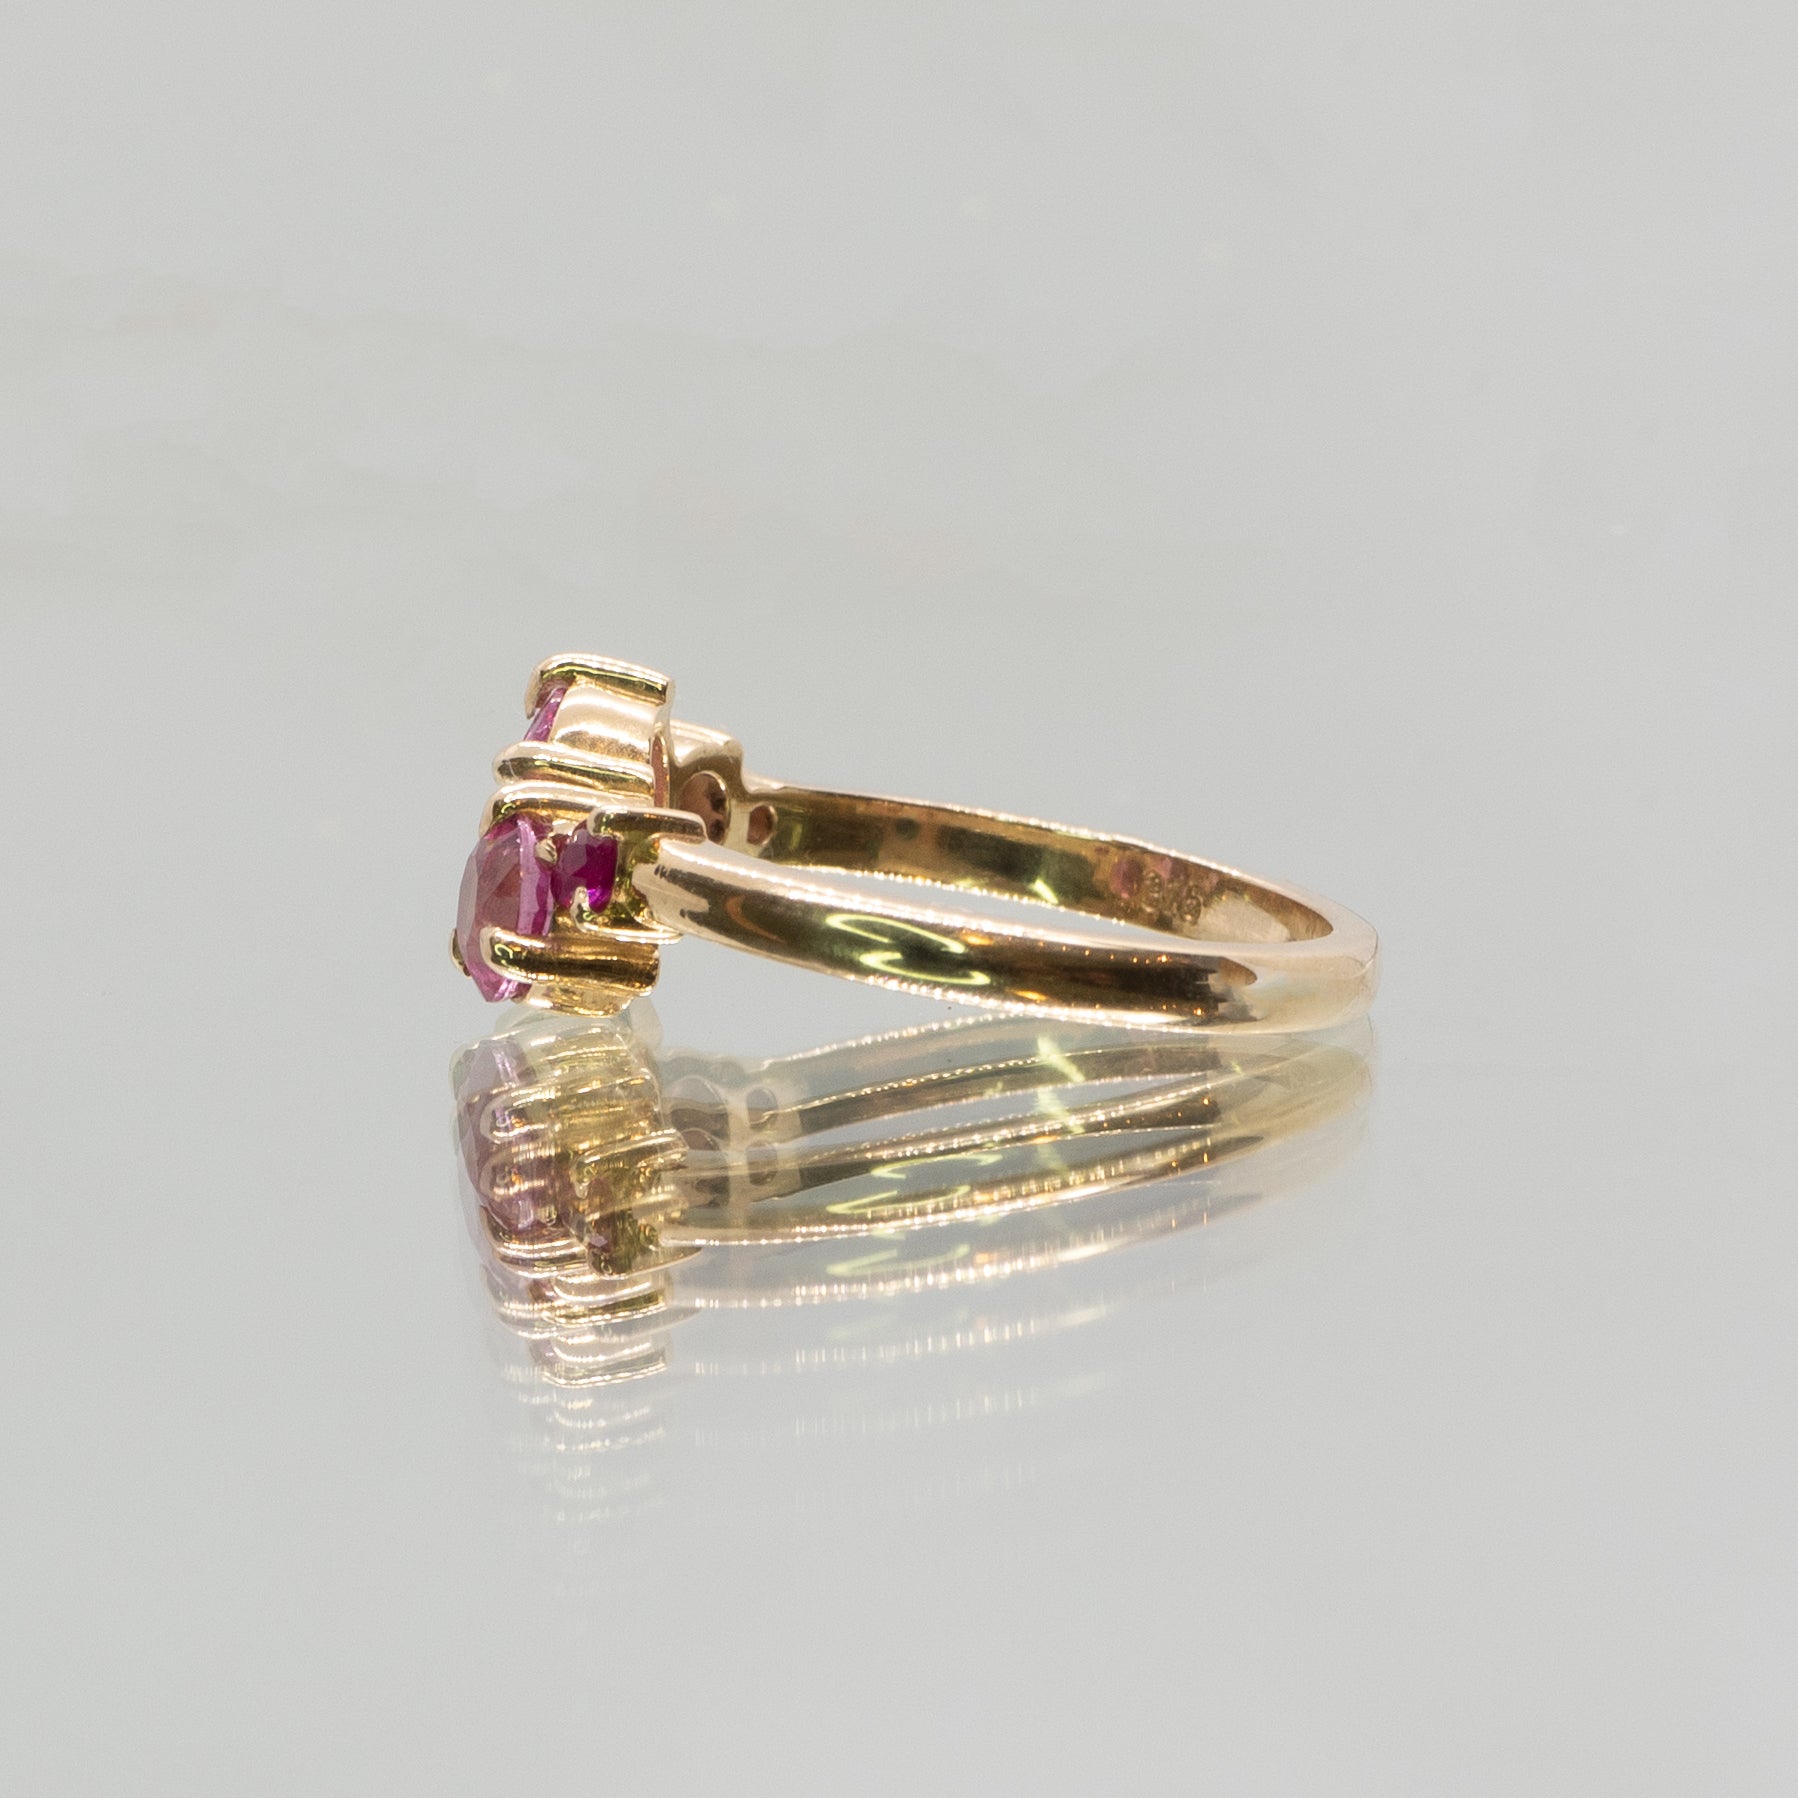 Bespoke - Pink Sapphire Cluster Ring